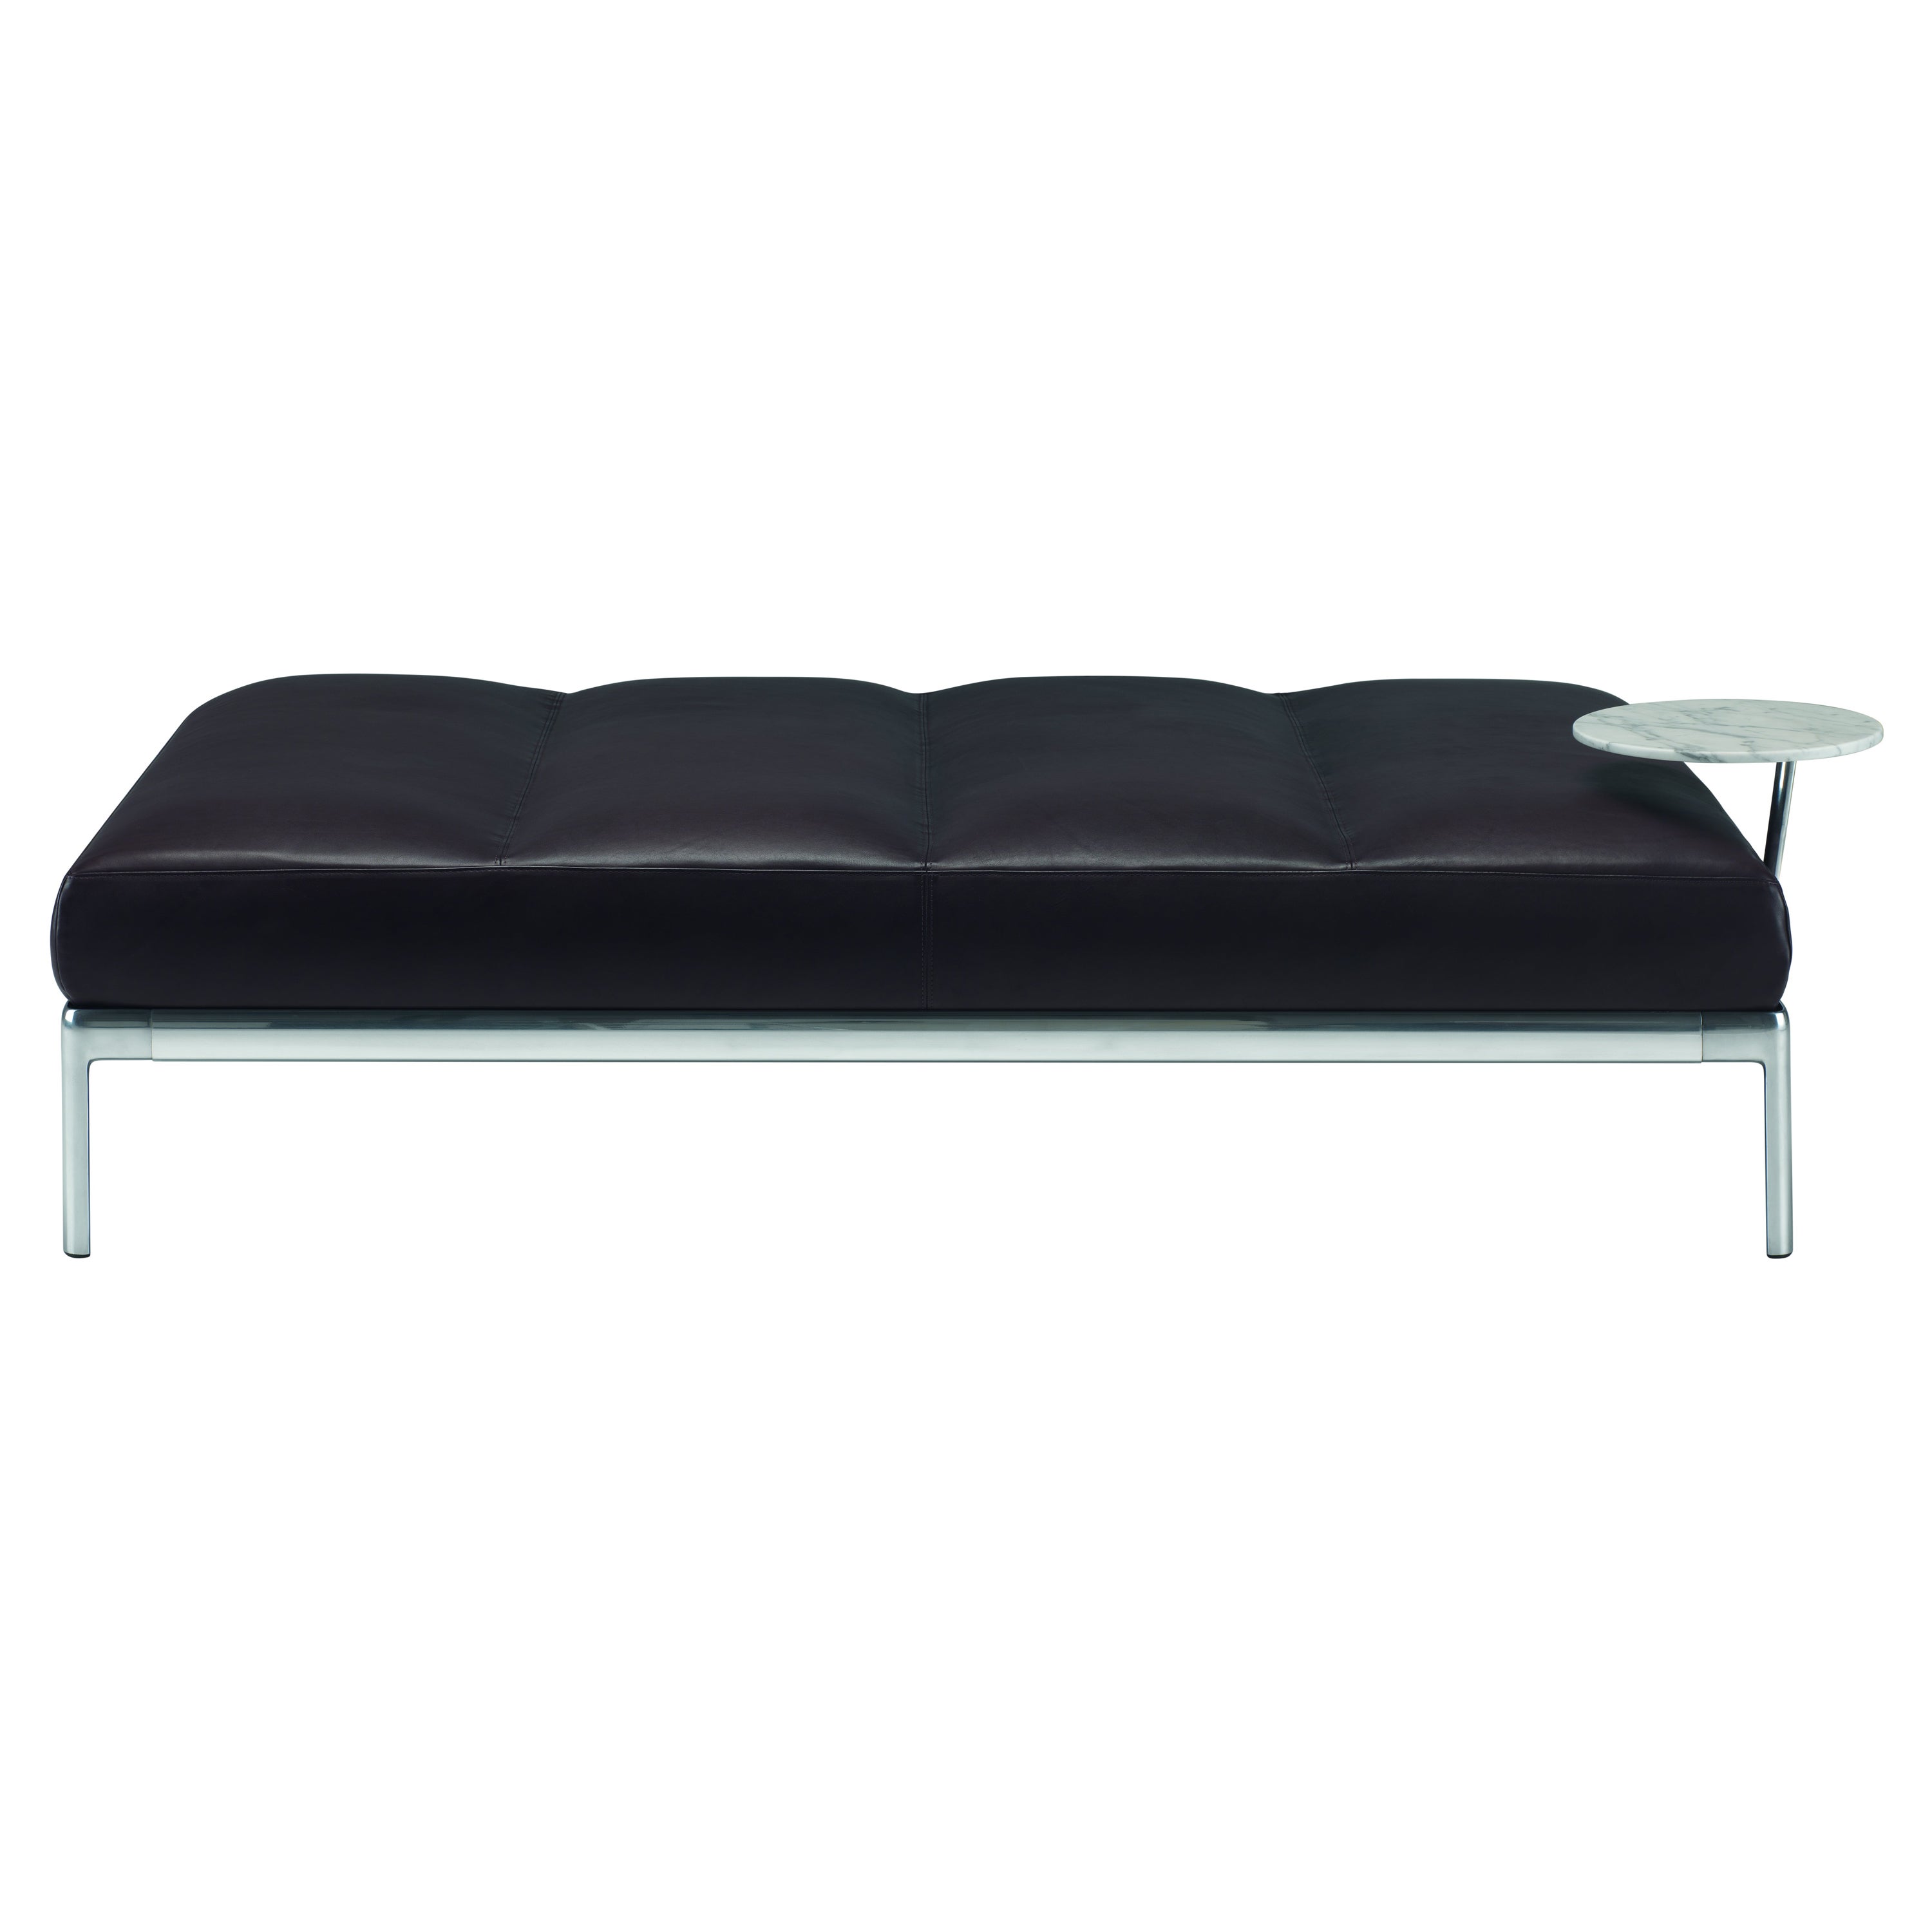 Alias P07 + P15 AluZen Bench with Low Table in Leather Seat & Aluminum Frame  For Sale